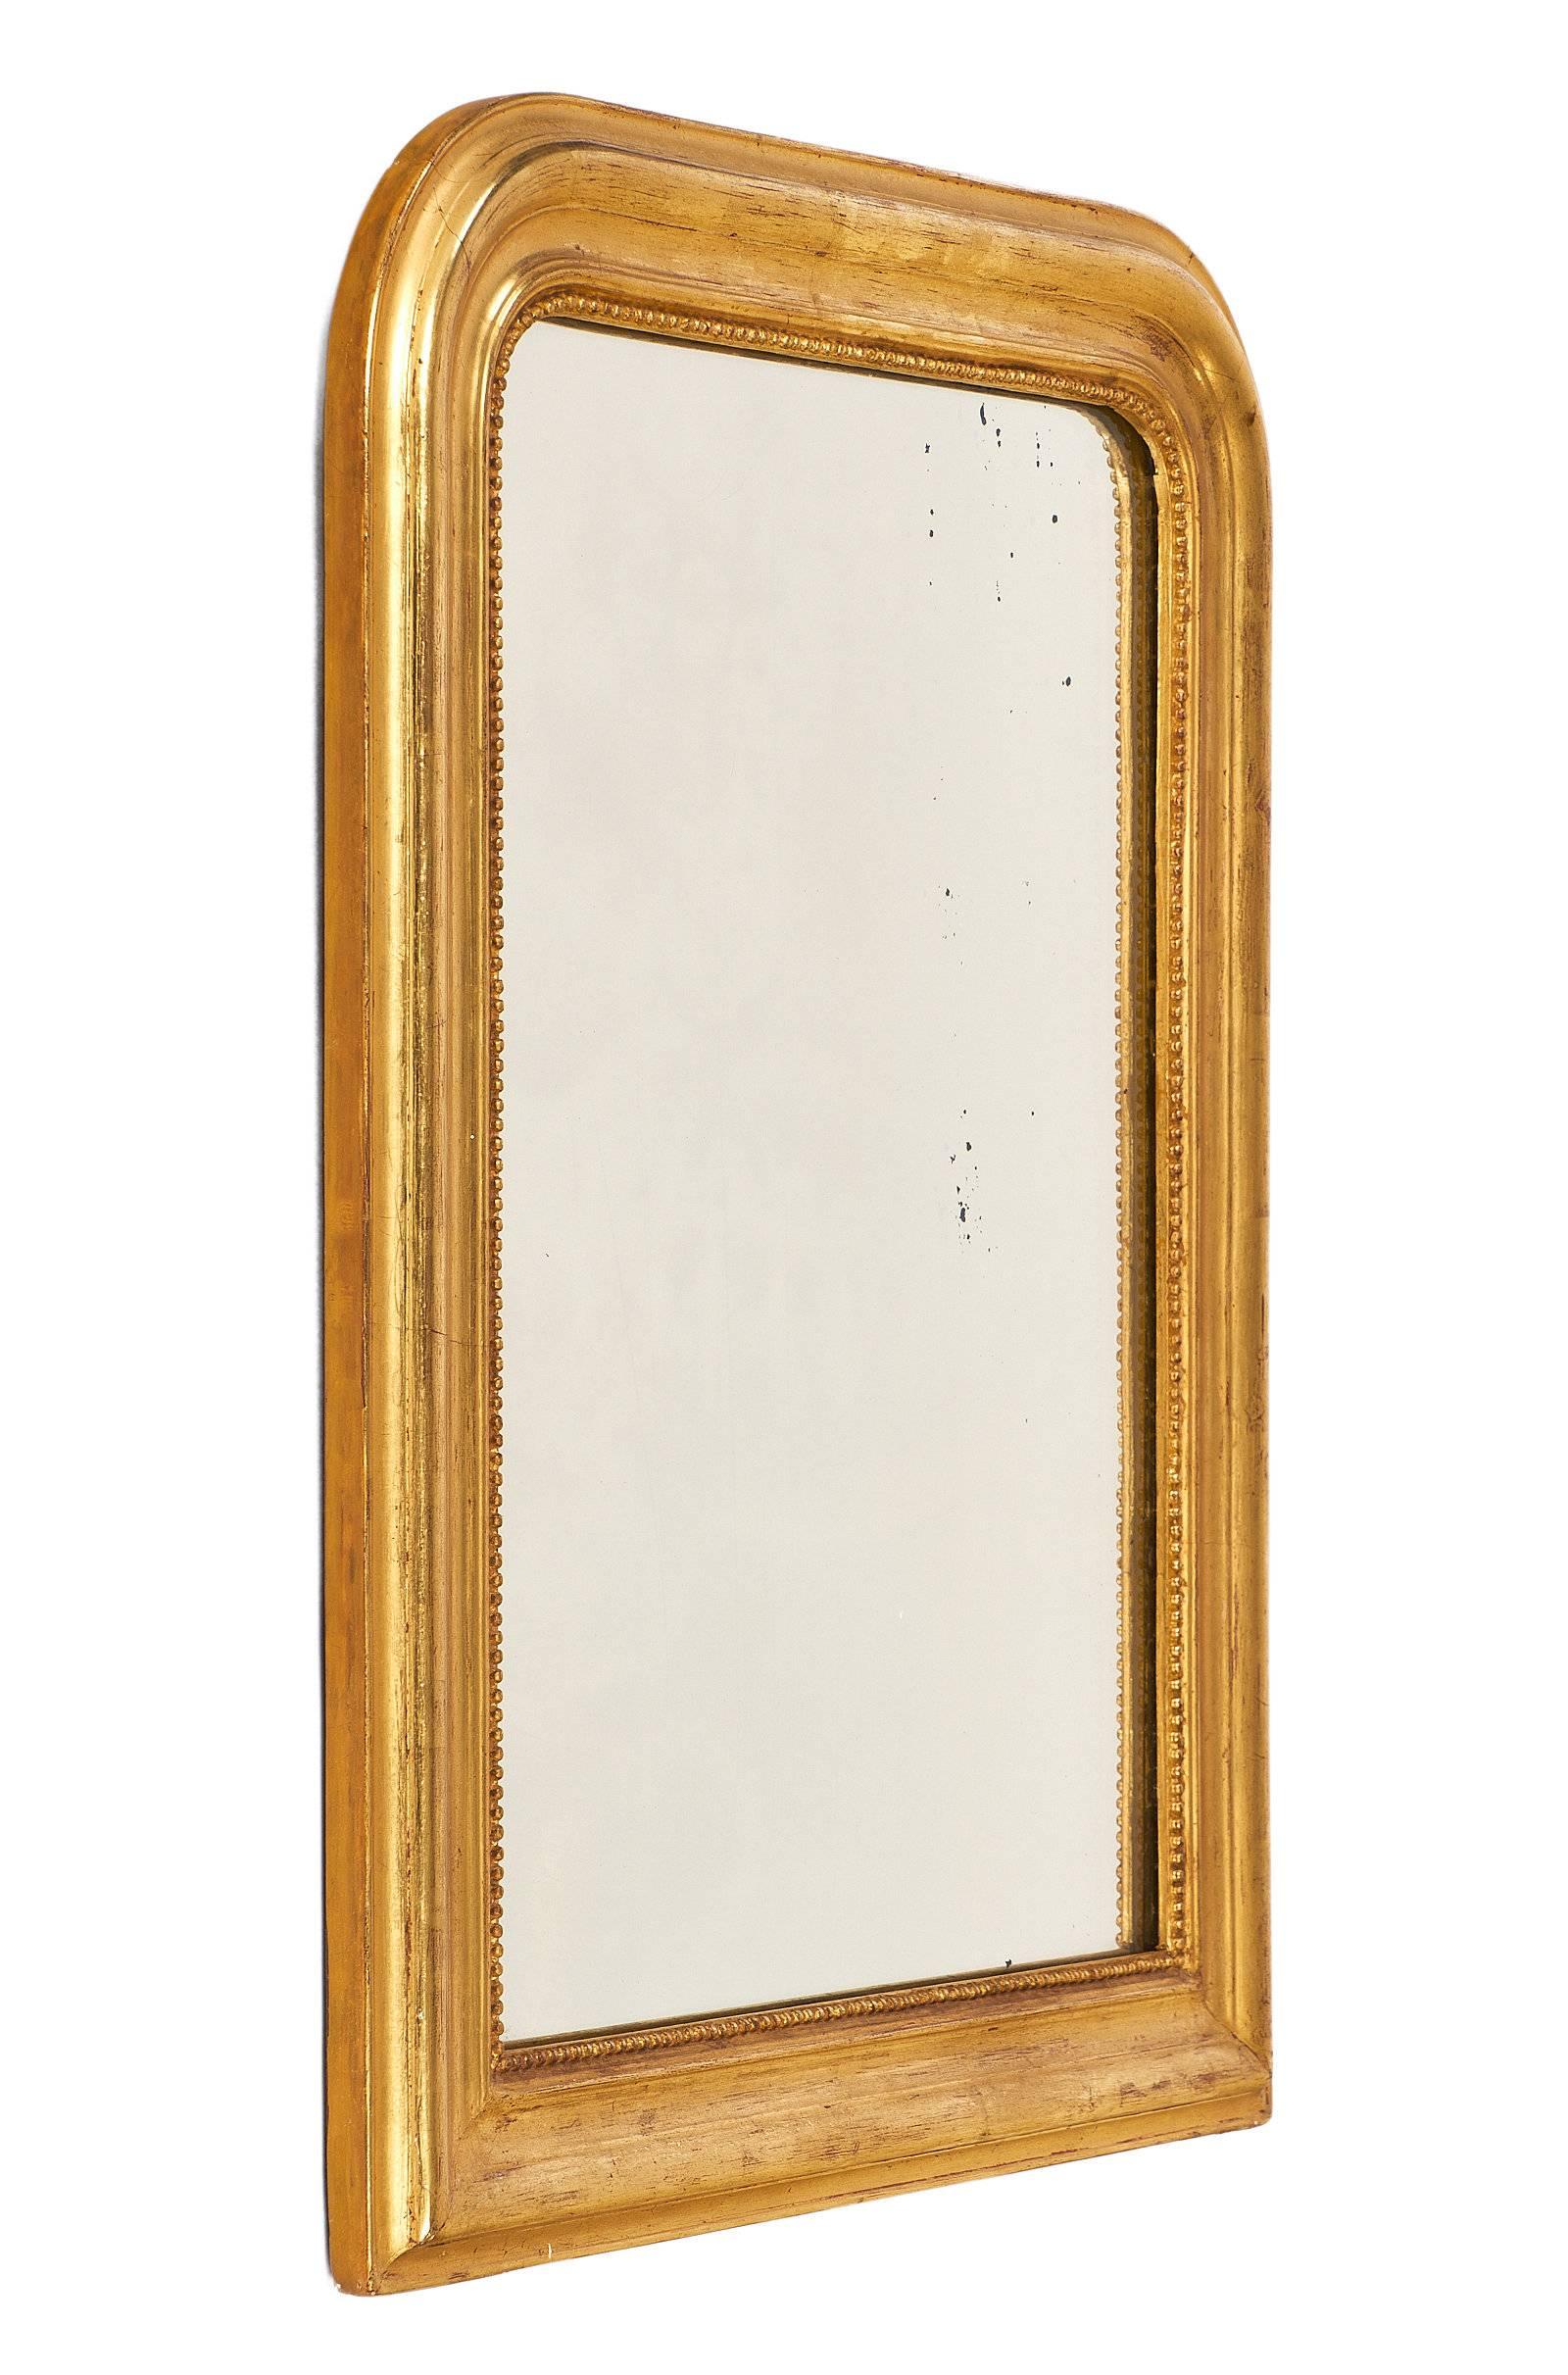 Elegant Louis Philippe mirror in excellent condition and small in size. This piece has the lovely curved upper corners of the Louis Philippe style and the original antique mirror. The frame has beading around the interior, and the small stature